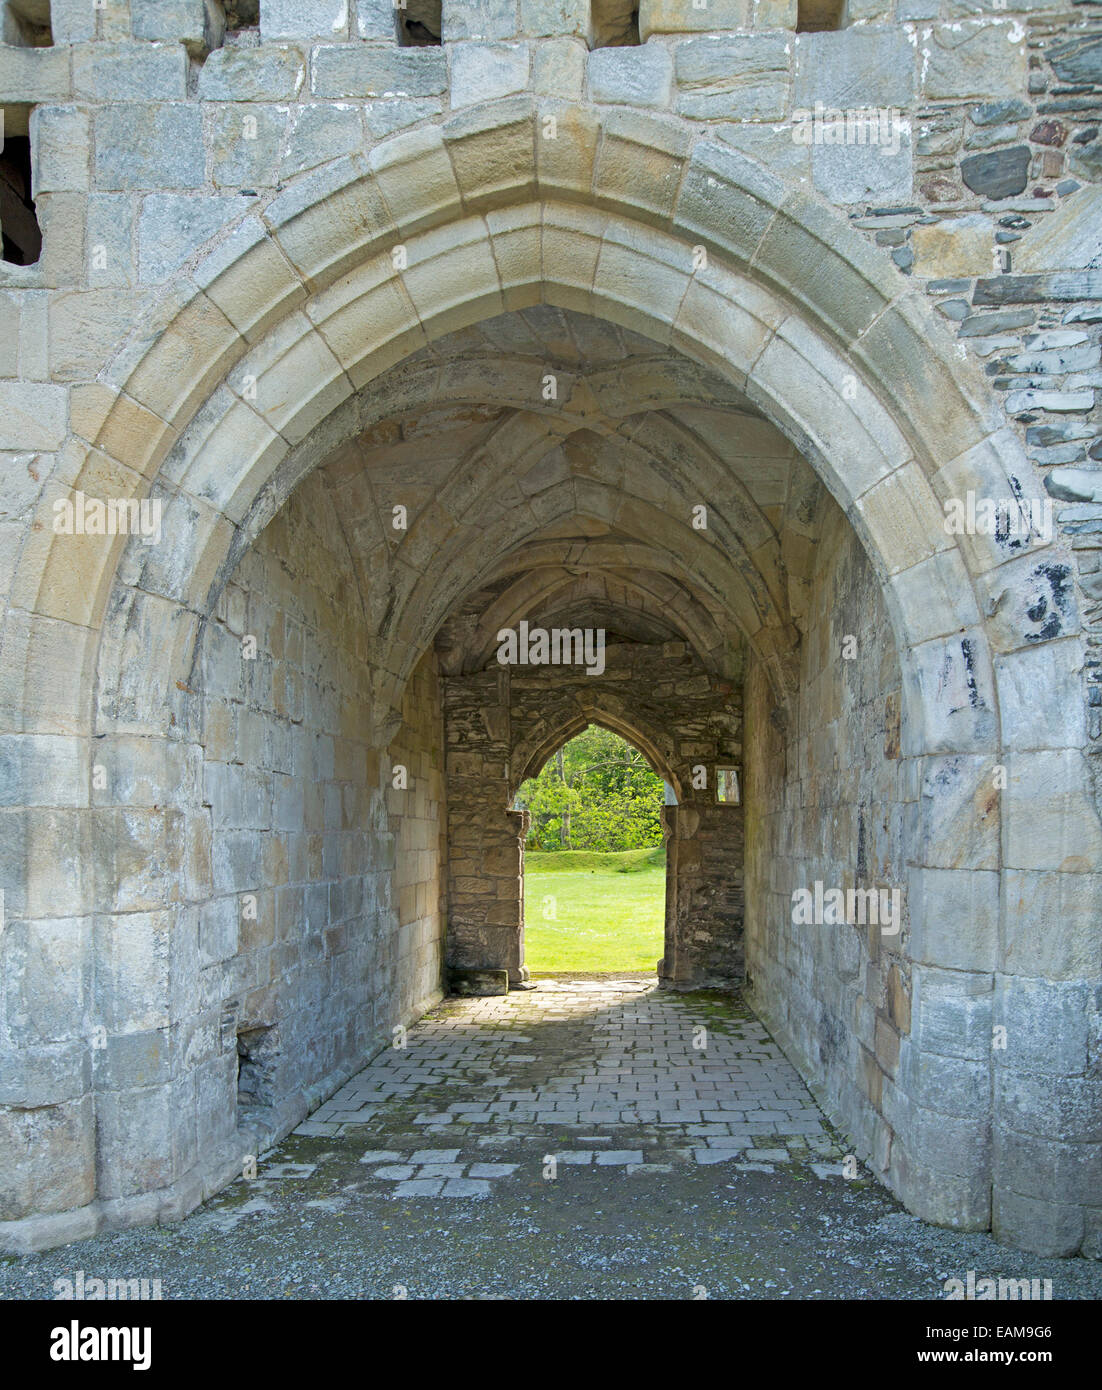 Ornate arched entrance into passageway with vaulted ceiling at 13th century Valle Crusis abbey ruins  near Llantysilio, Wales Stock Photo